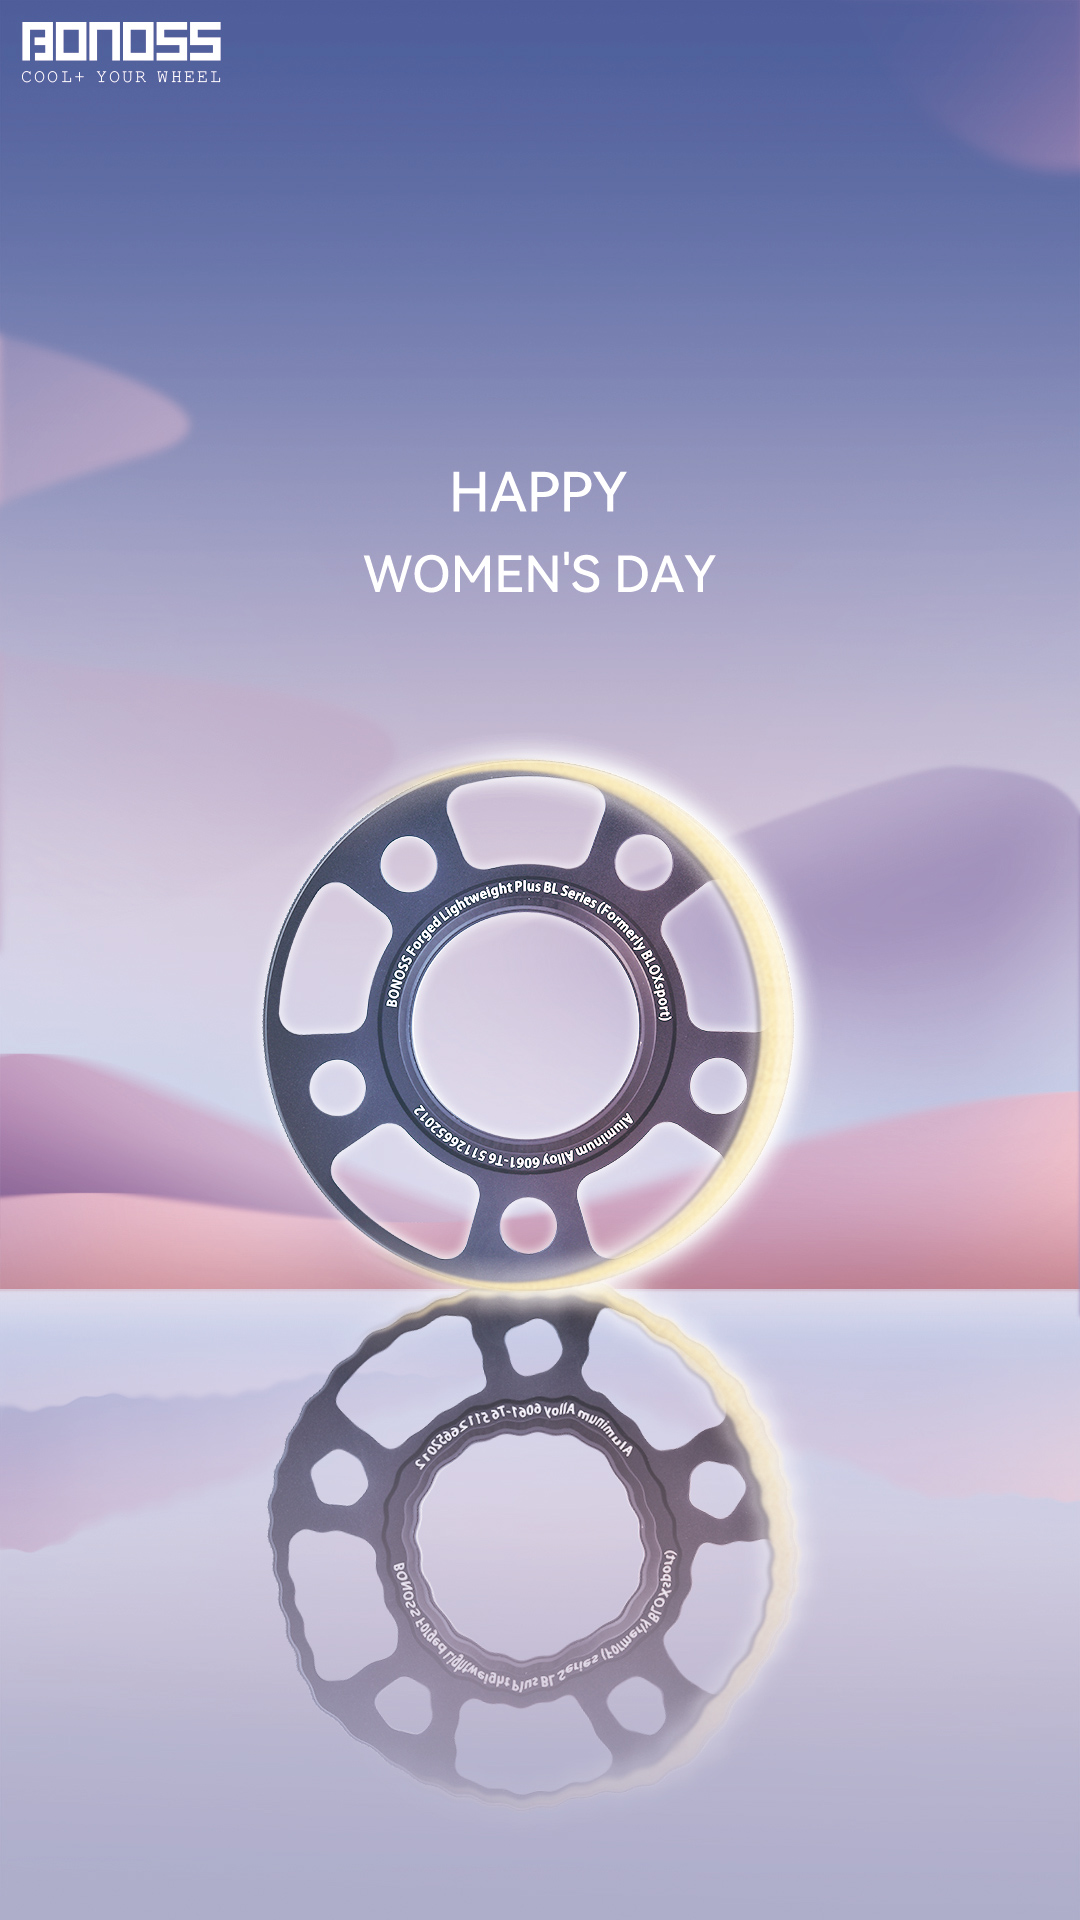 Happy Women's Days 2022 BONOSS Wheel Spacers Lightweight Car Spacers for Rims